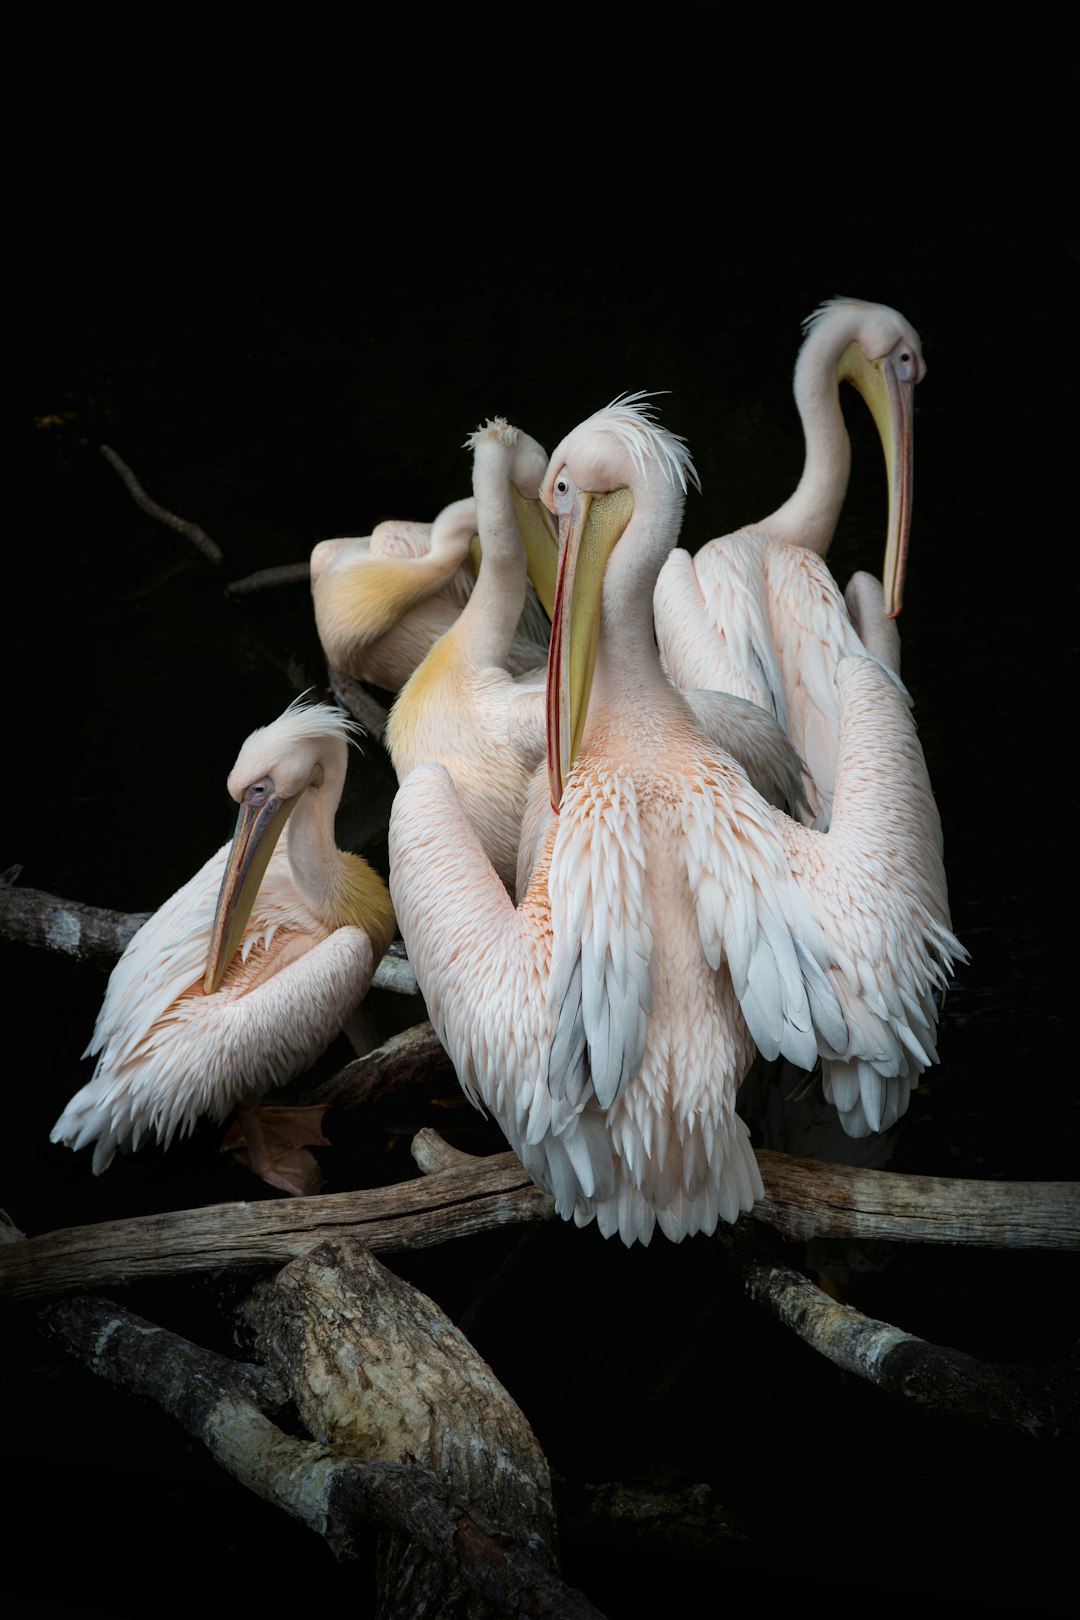 ultrarealistic, high quality photograph of five pelicans huddled together on branches in the dark black background. The pel feast on fish from their mouth with long beaks and white bodies and pink wings. They have large yellow eyes that reflect light around them. Their necks stretch out straight as they rest their heads against each other. In the style of National Geographic photography.